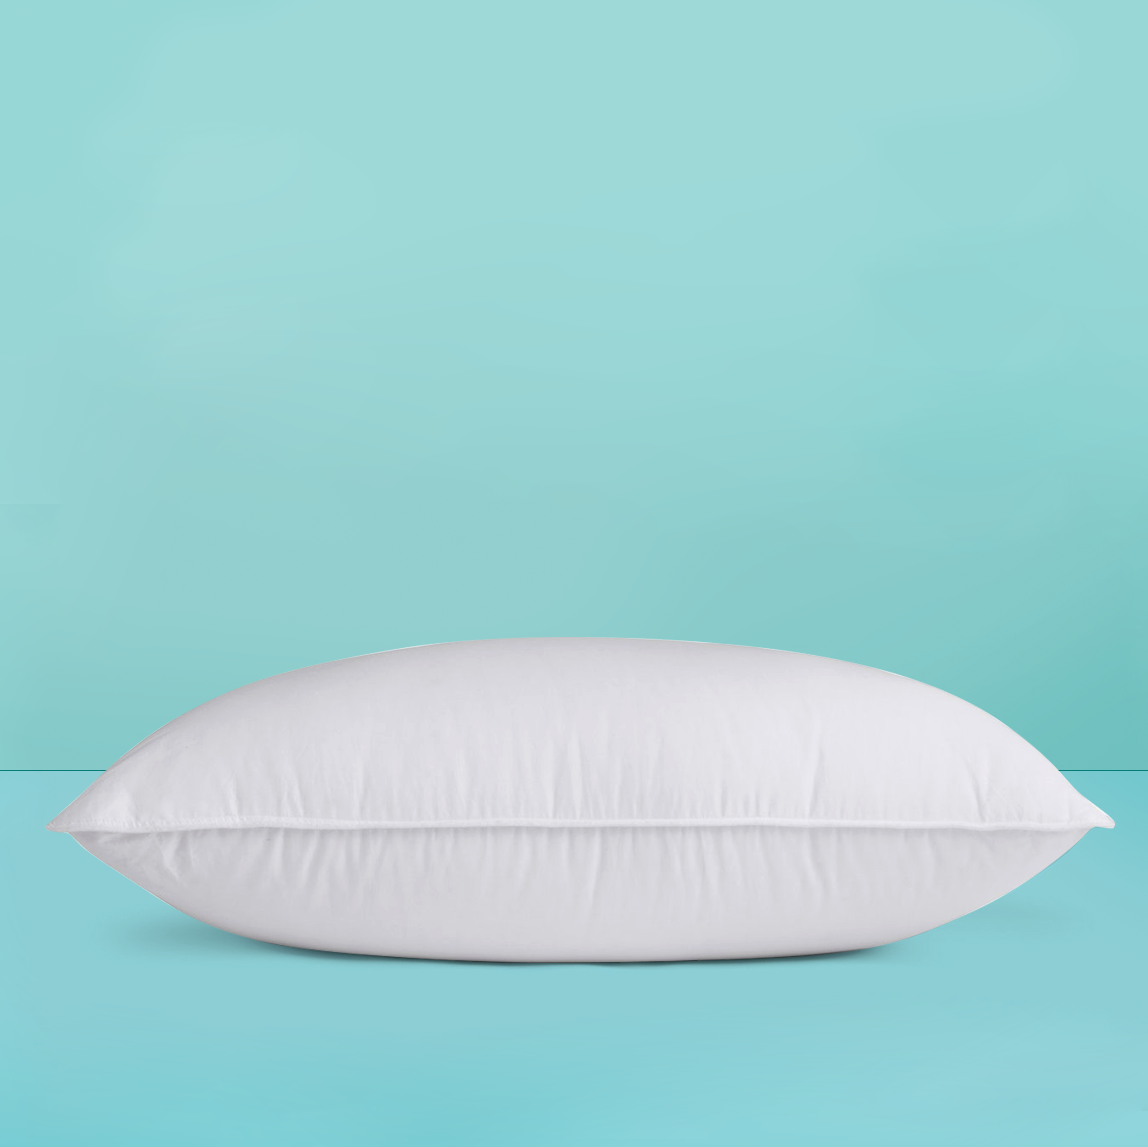 https://hips.hearstapps.com/hmg-prod/images/gh-020721-ghi-types-of-pillows-1612840556.png?crop=0.574xw:0.882xh;0.218xw,0.108xh&resize=1200:*